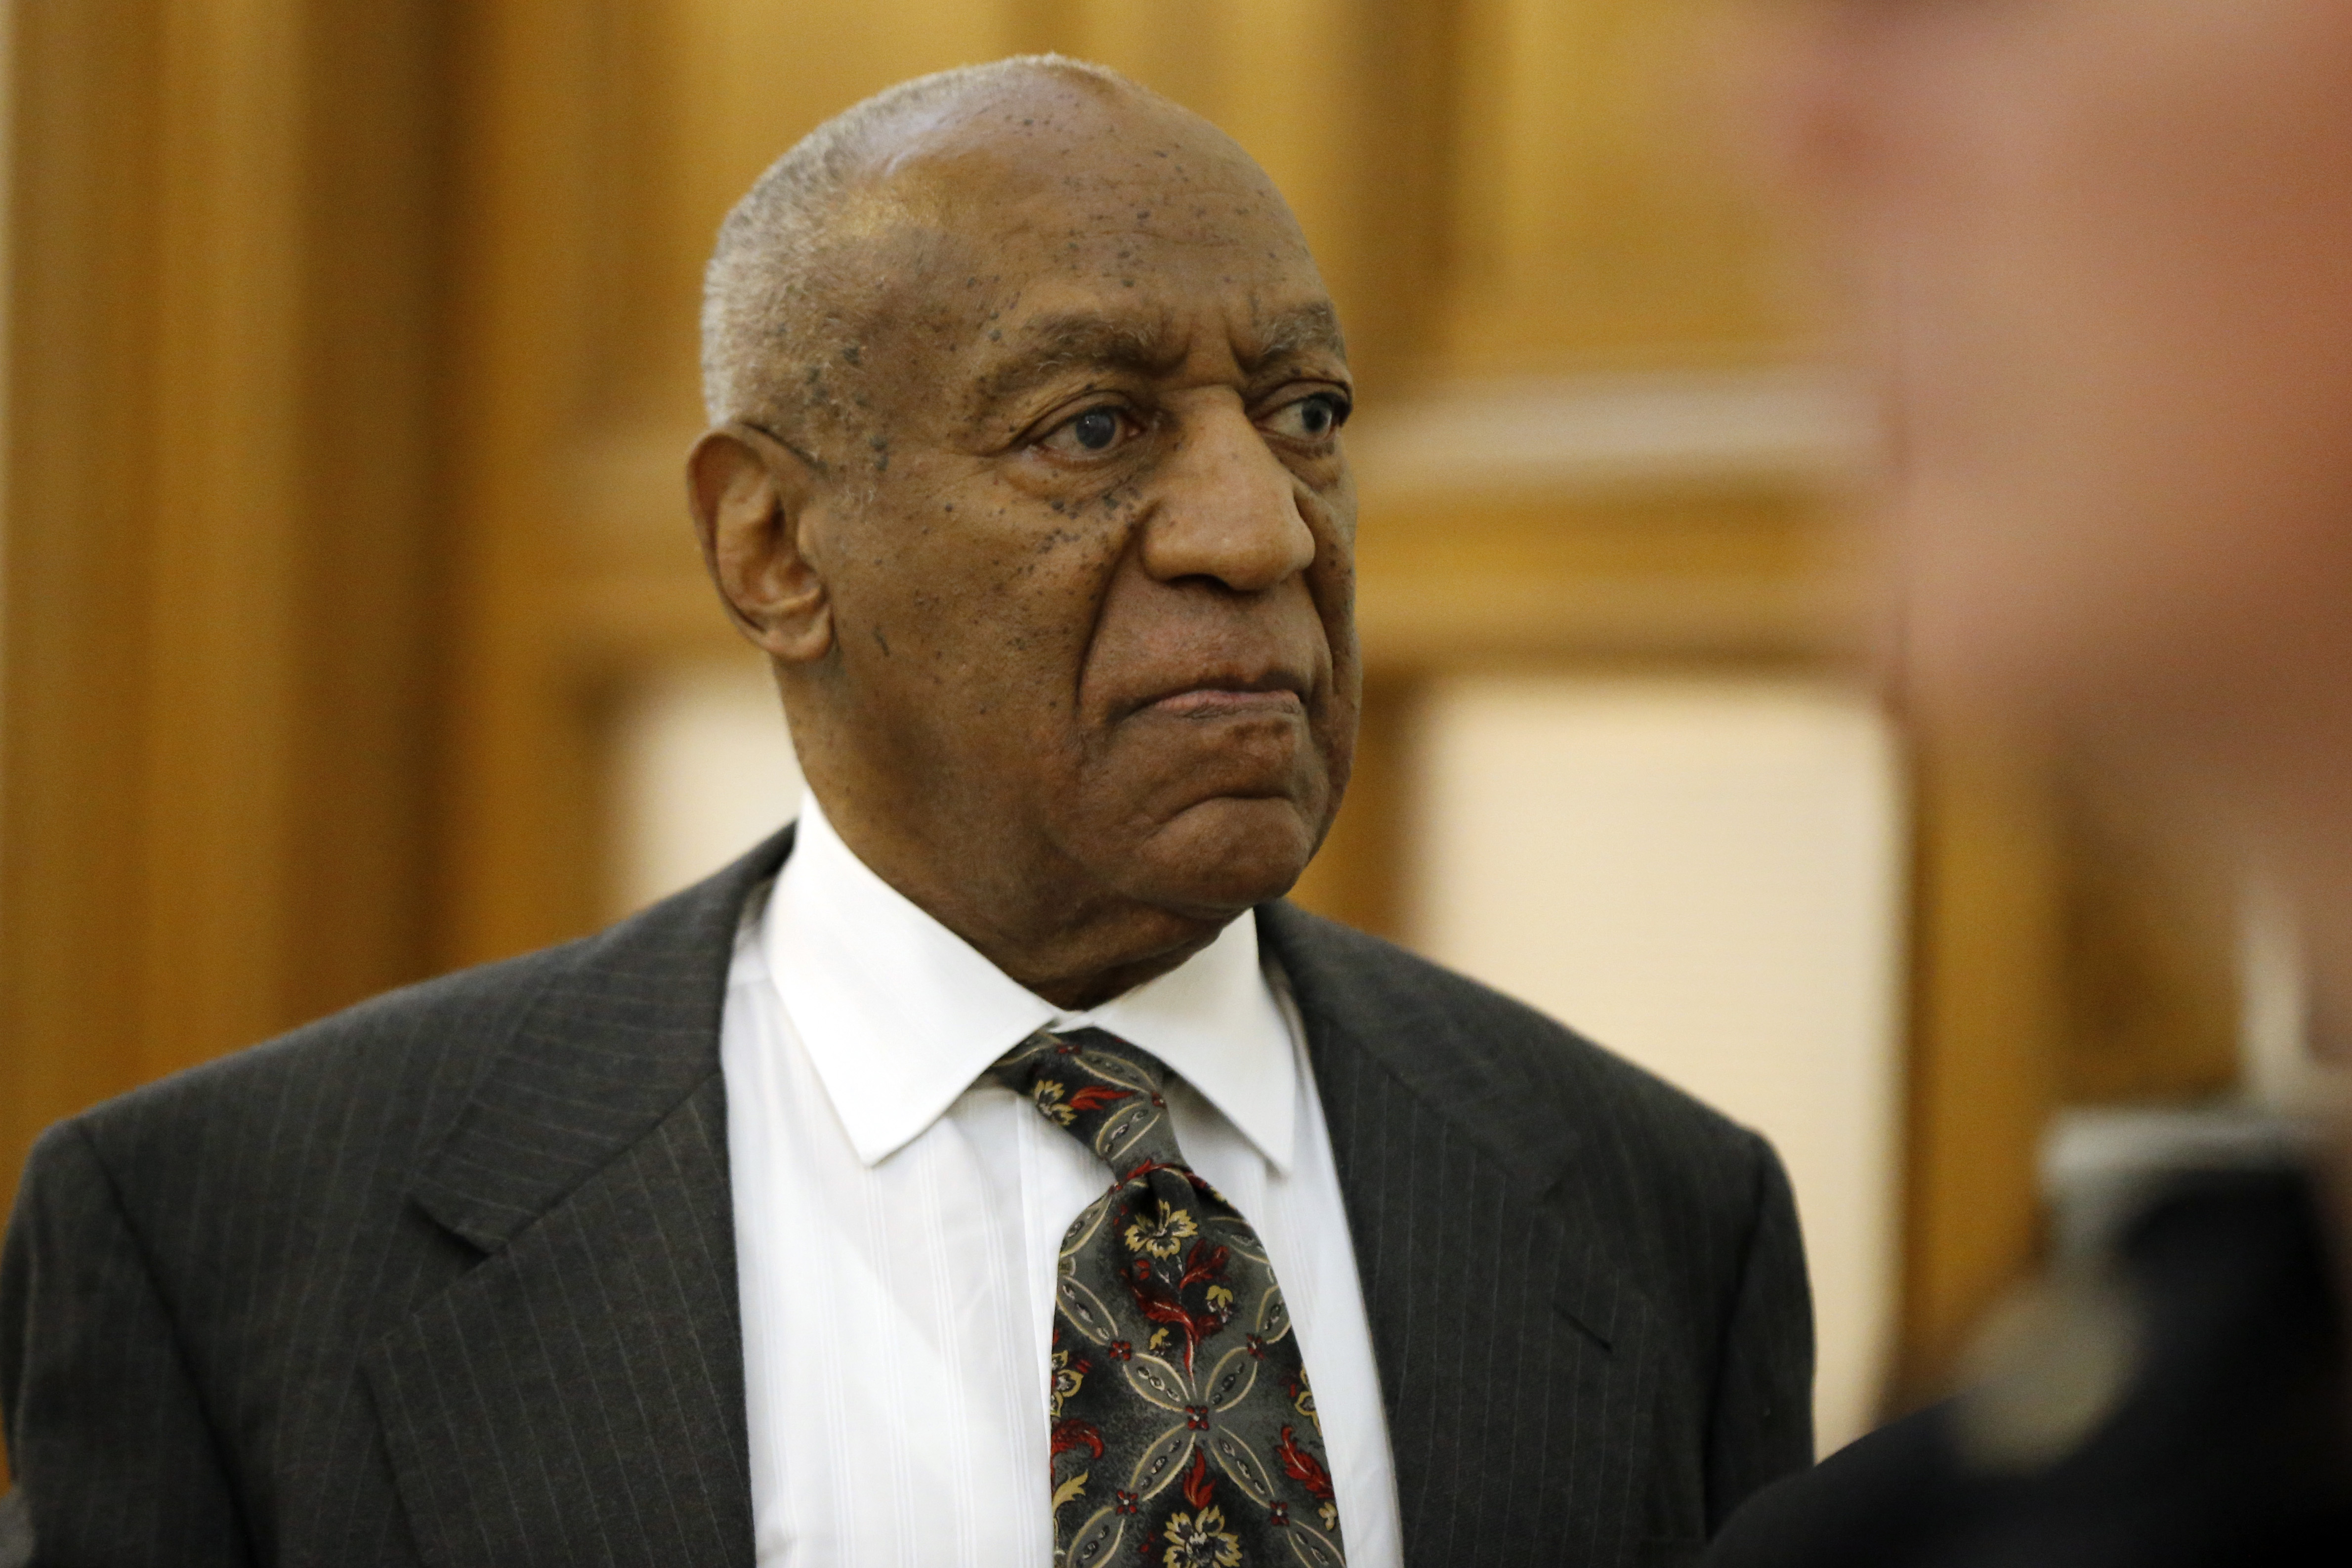 Bill Cosby at the Montgomery County Courthouse on May 24, 2016, in Norristown, Pennsylvania. | Source: Getty Images